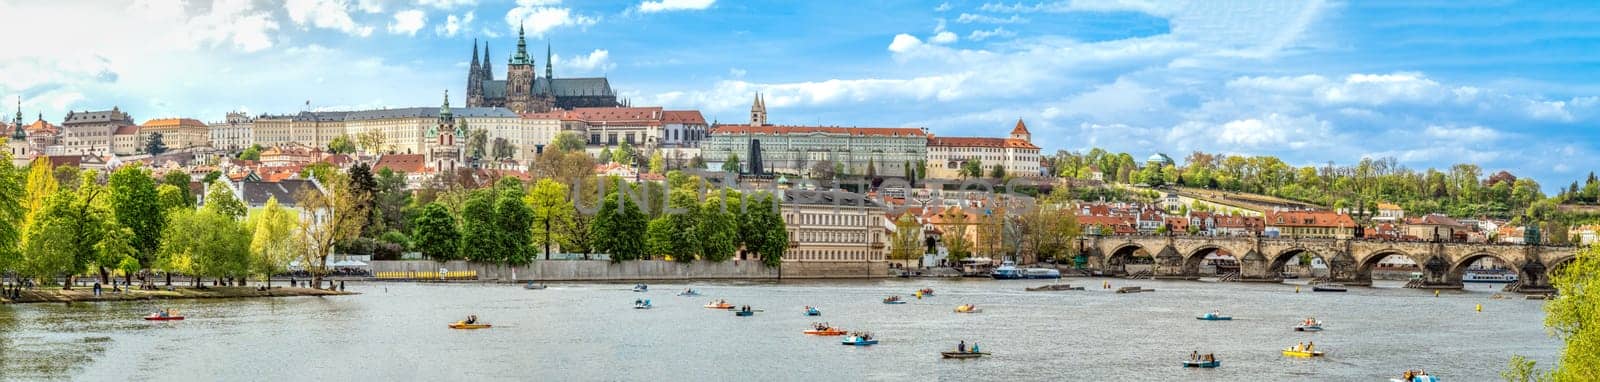 A panoramic view of Prague, the capital of the Czech Republic. View of Prague Castle and Charles Bridge. Summer time, people swim on catamarans. banner by Edophoto